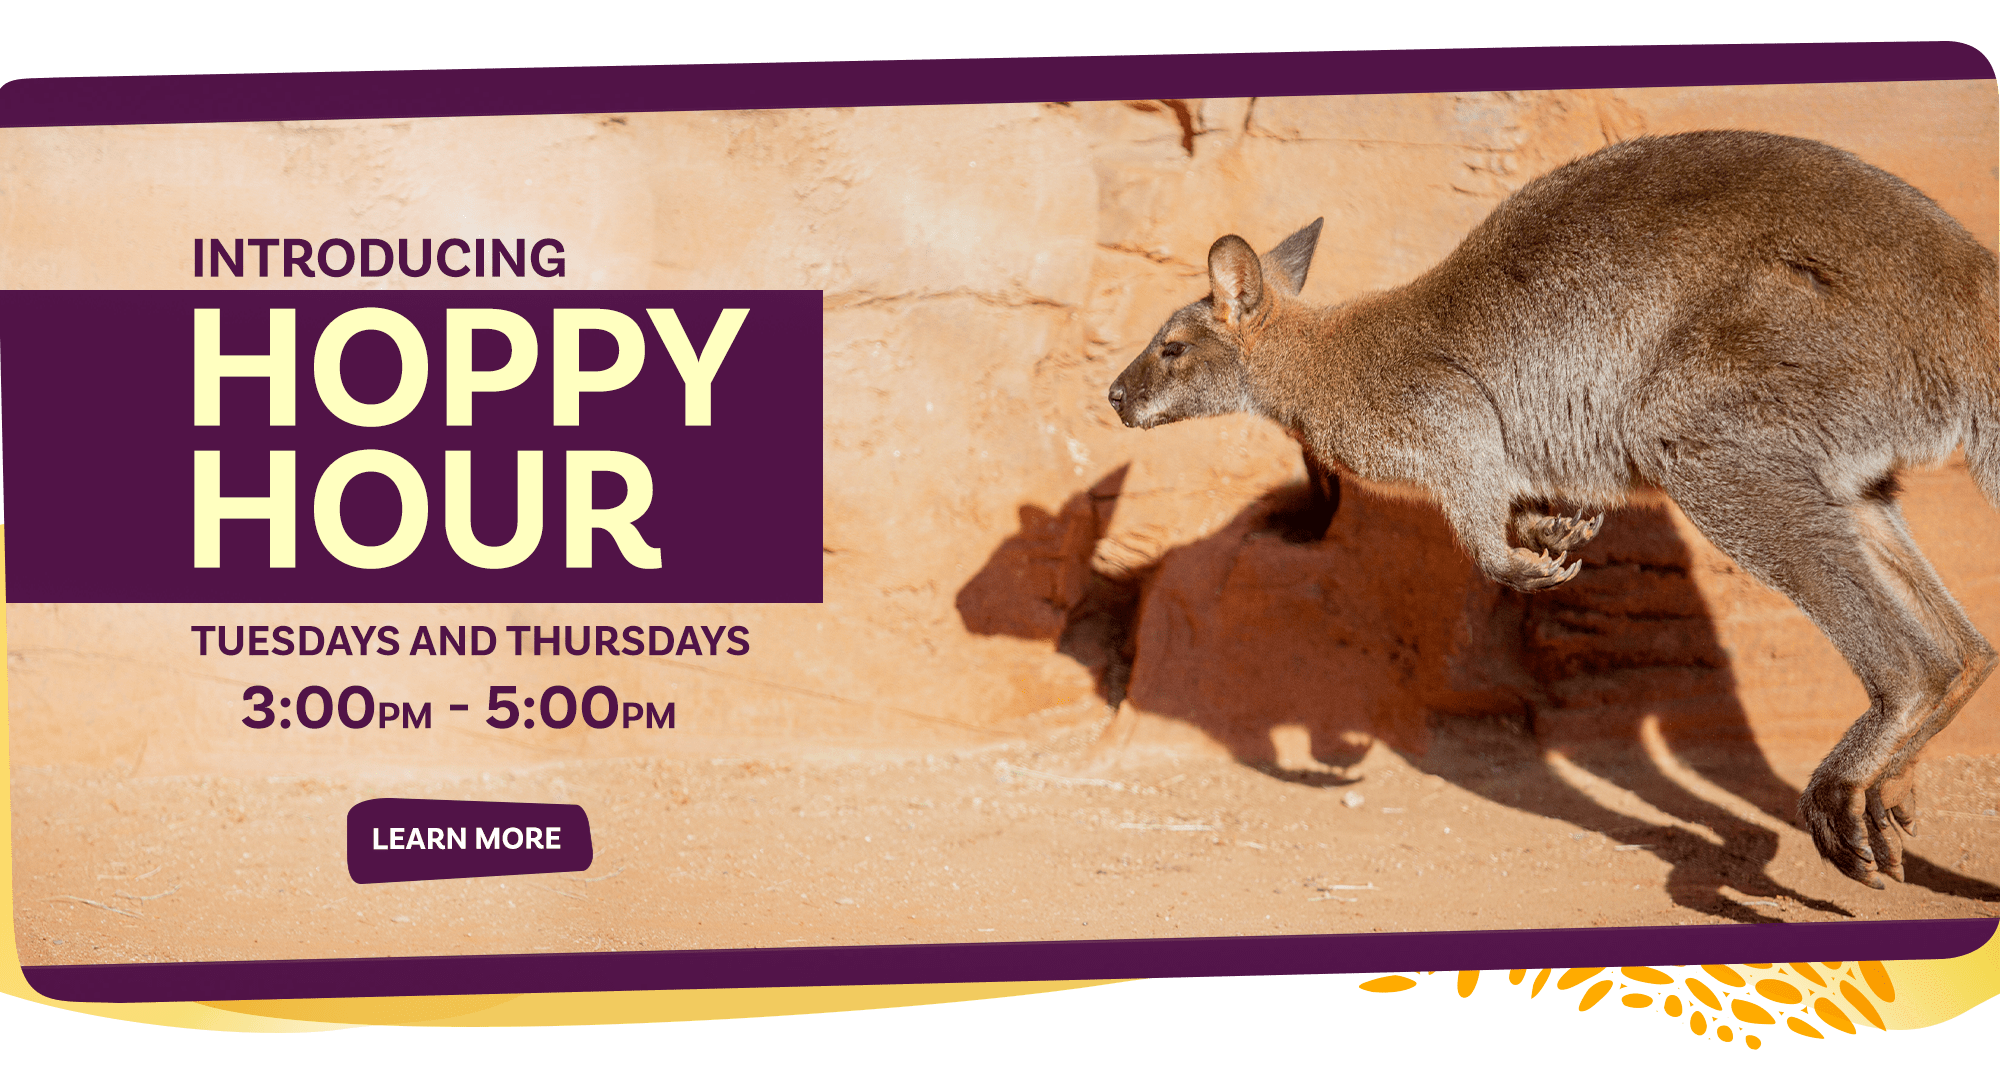 Hoppy Hour homepage banner at The Living Desert Zoo and Gardens!